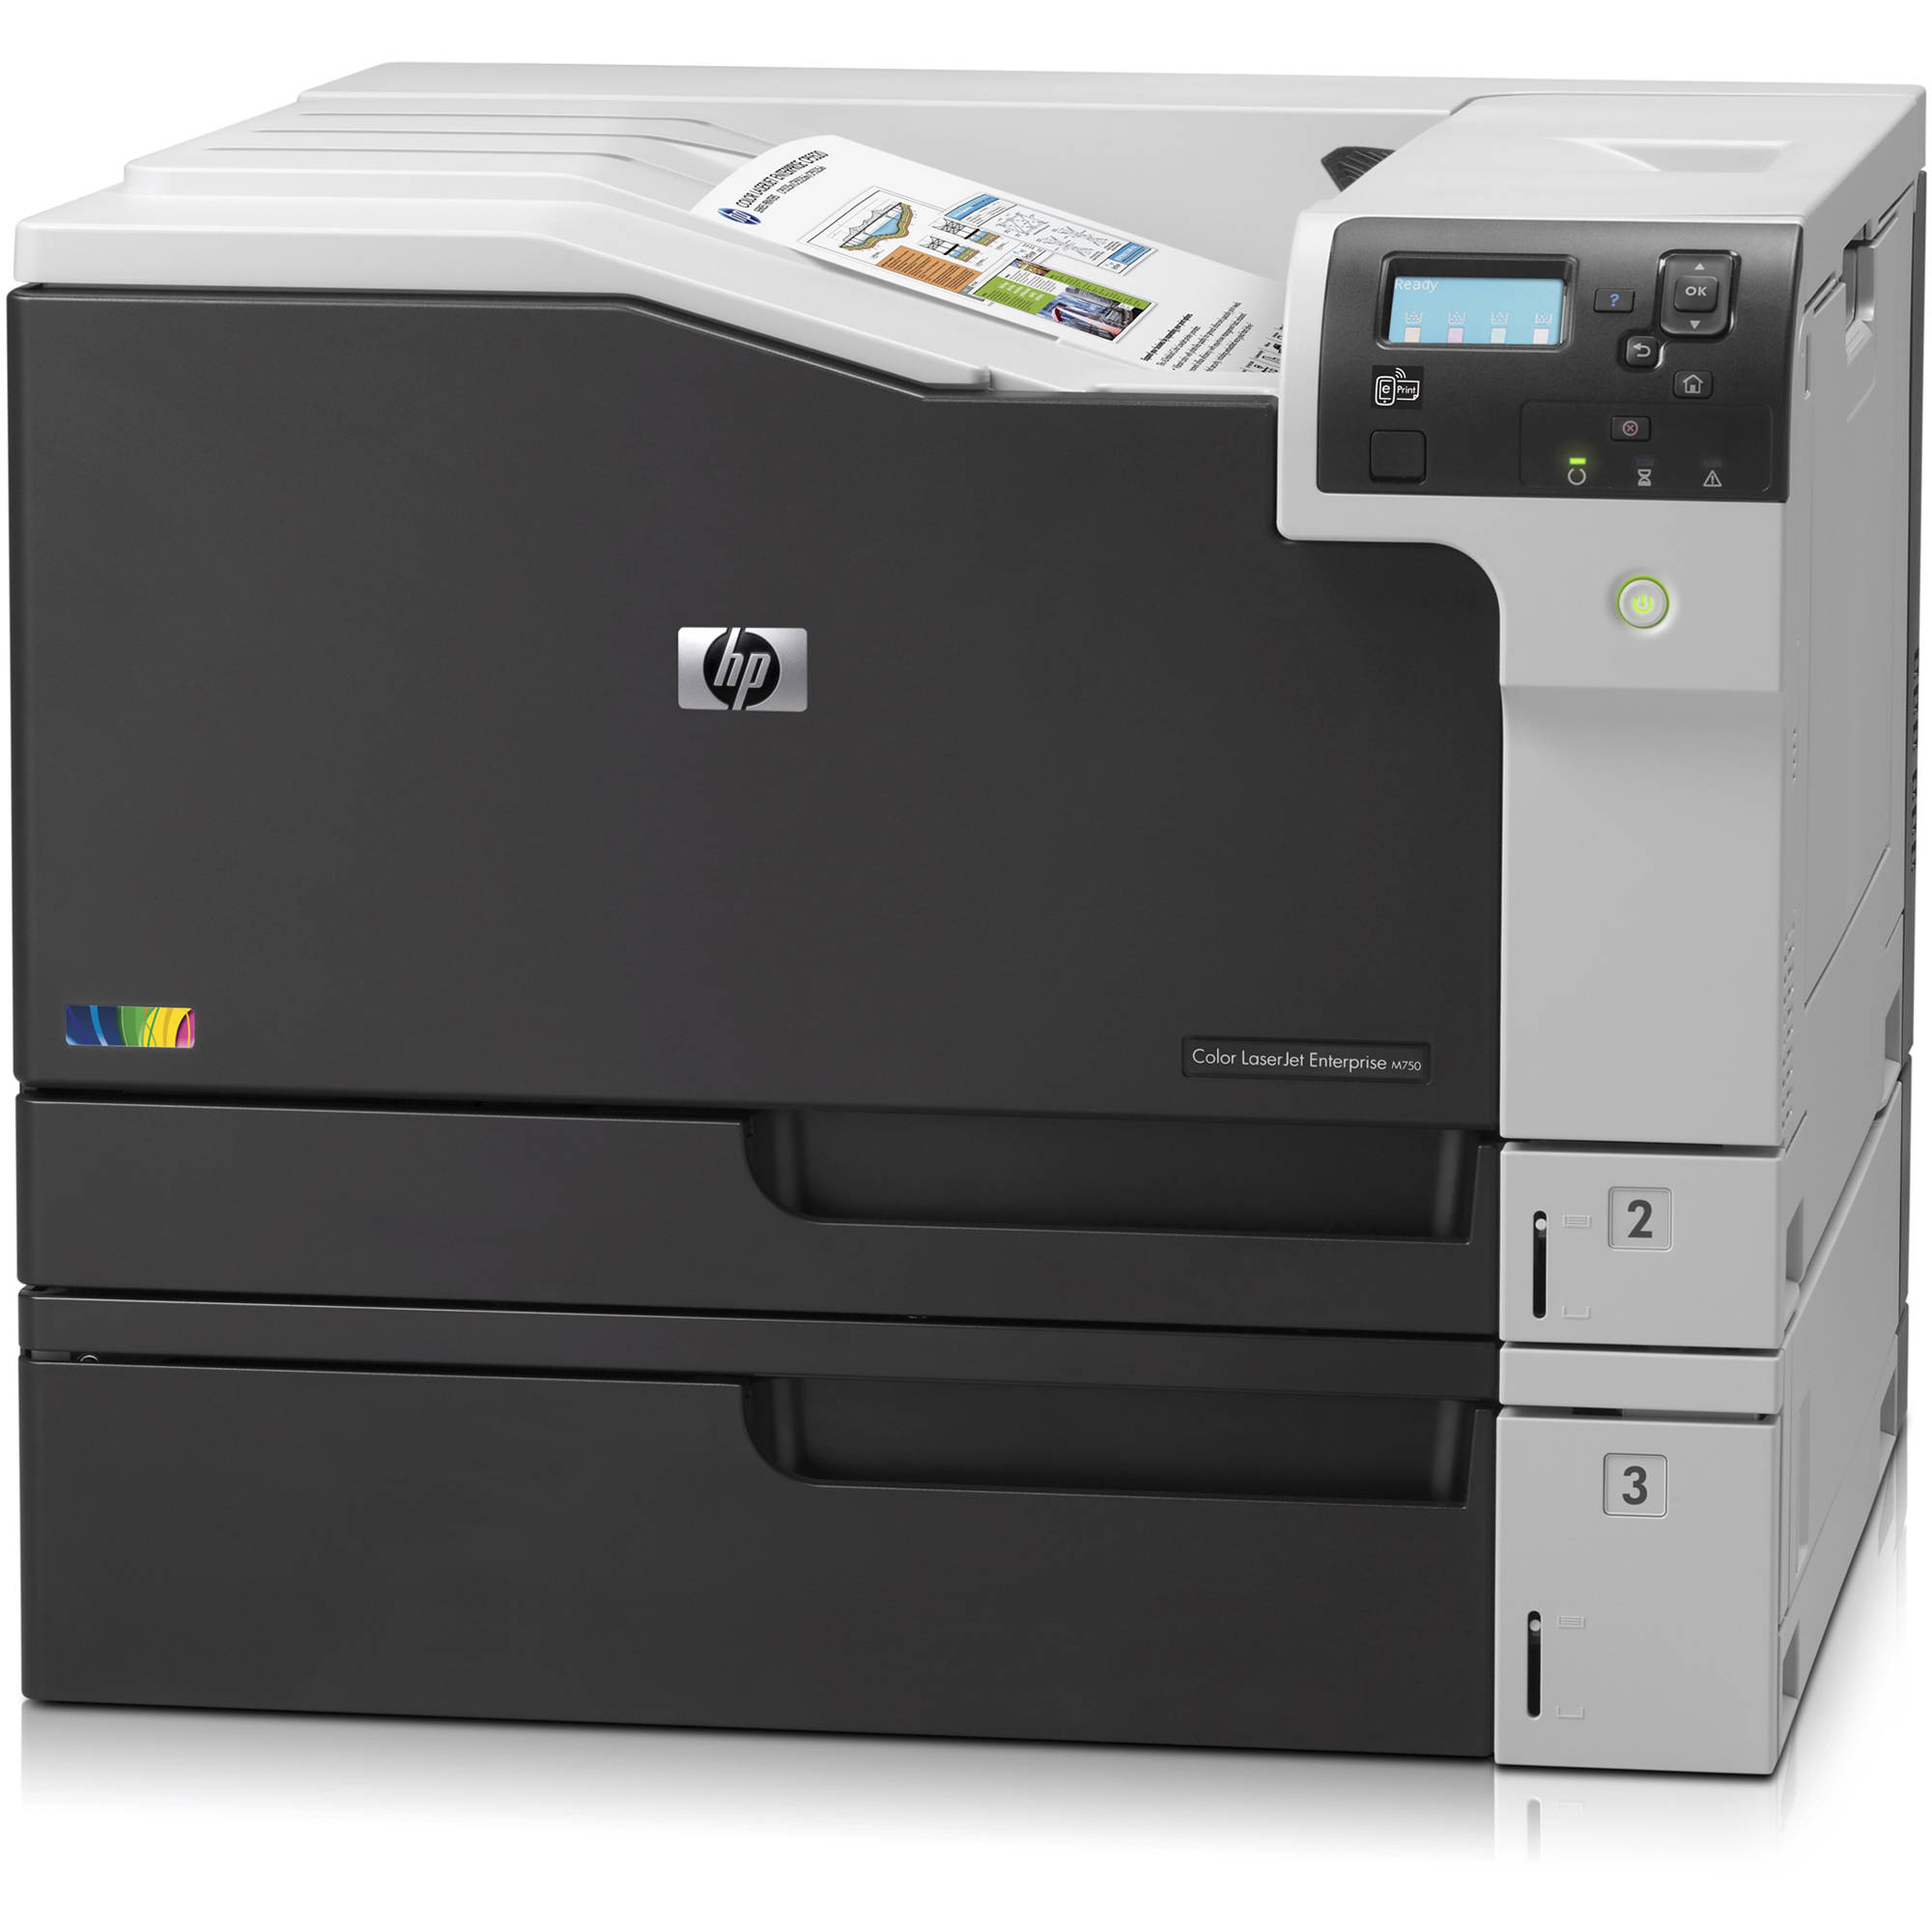 Absolute Toner $35/Month HP Color Laserjet Enterprise M750dn (D3L09A) Printer, 11x17 With Automatic Duplex Printing And Two Trays For Your Home/Office - Easy To Use Color Printer Laser Printer